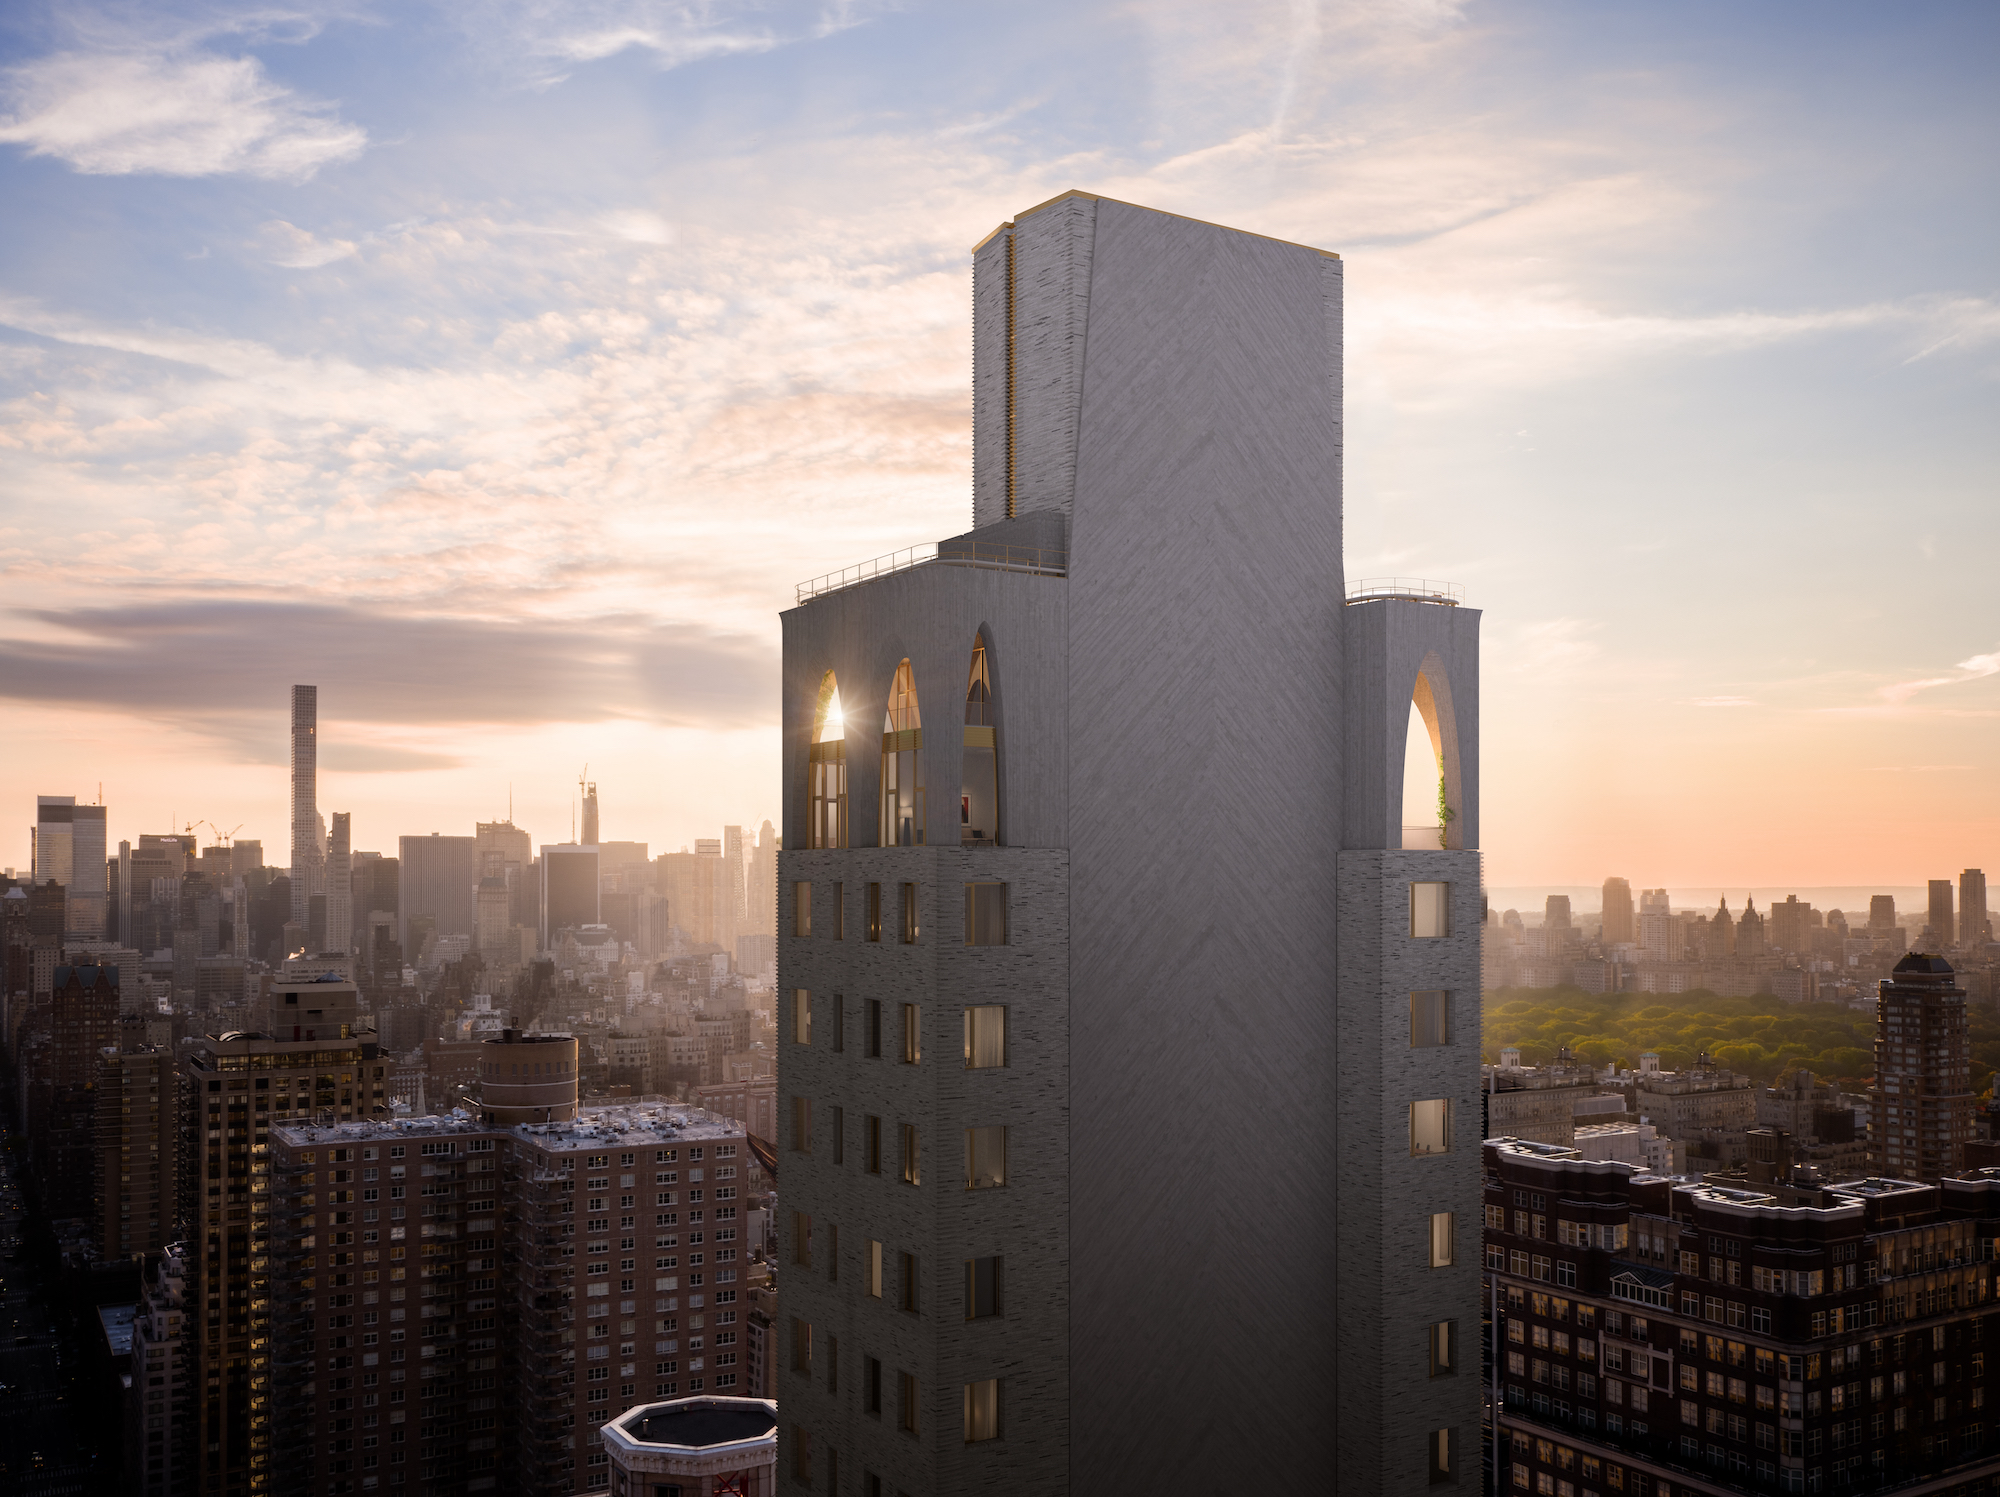 Asking $33M, the tallest penthouse on the UES has dramatic